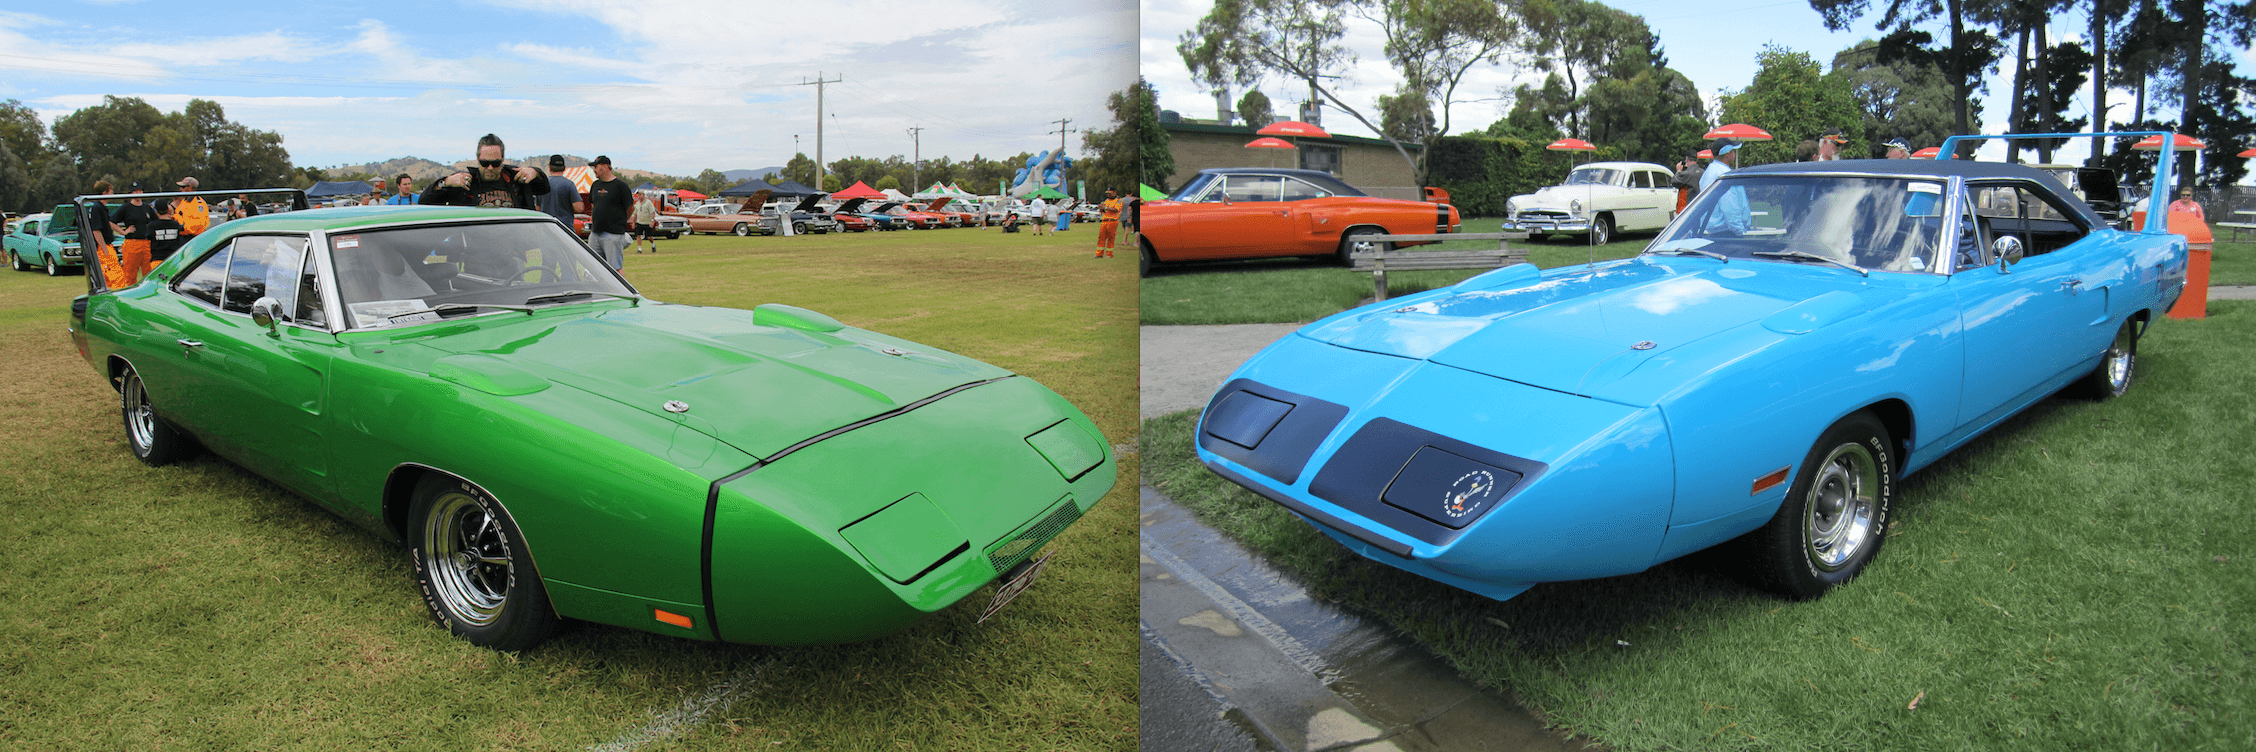 Tale of the Tape: The 1969-70 Dodge Charger Daytona vs. The 1970 Plymouth  Superbird | Legendary Auto Interiors